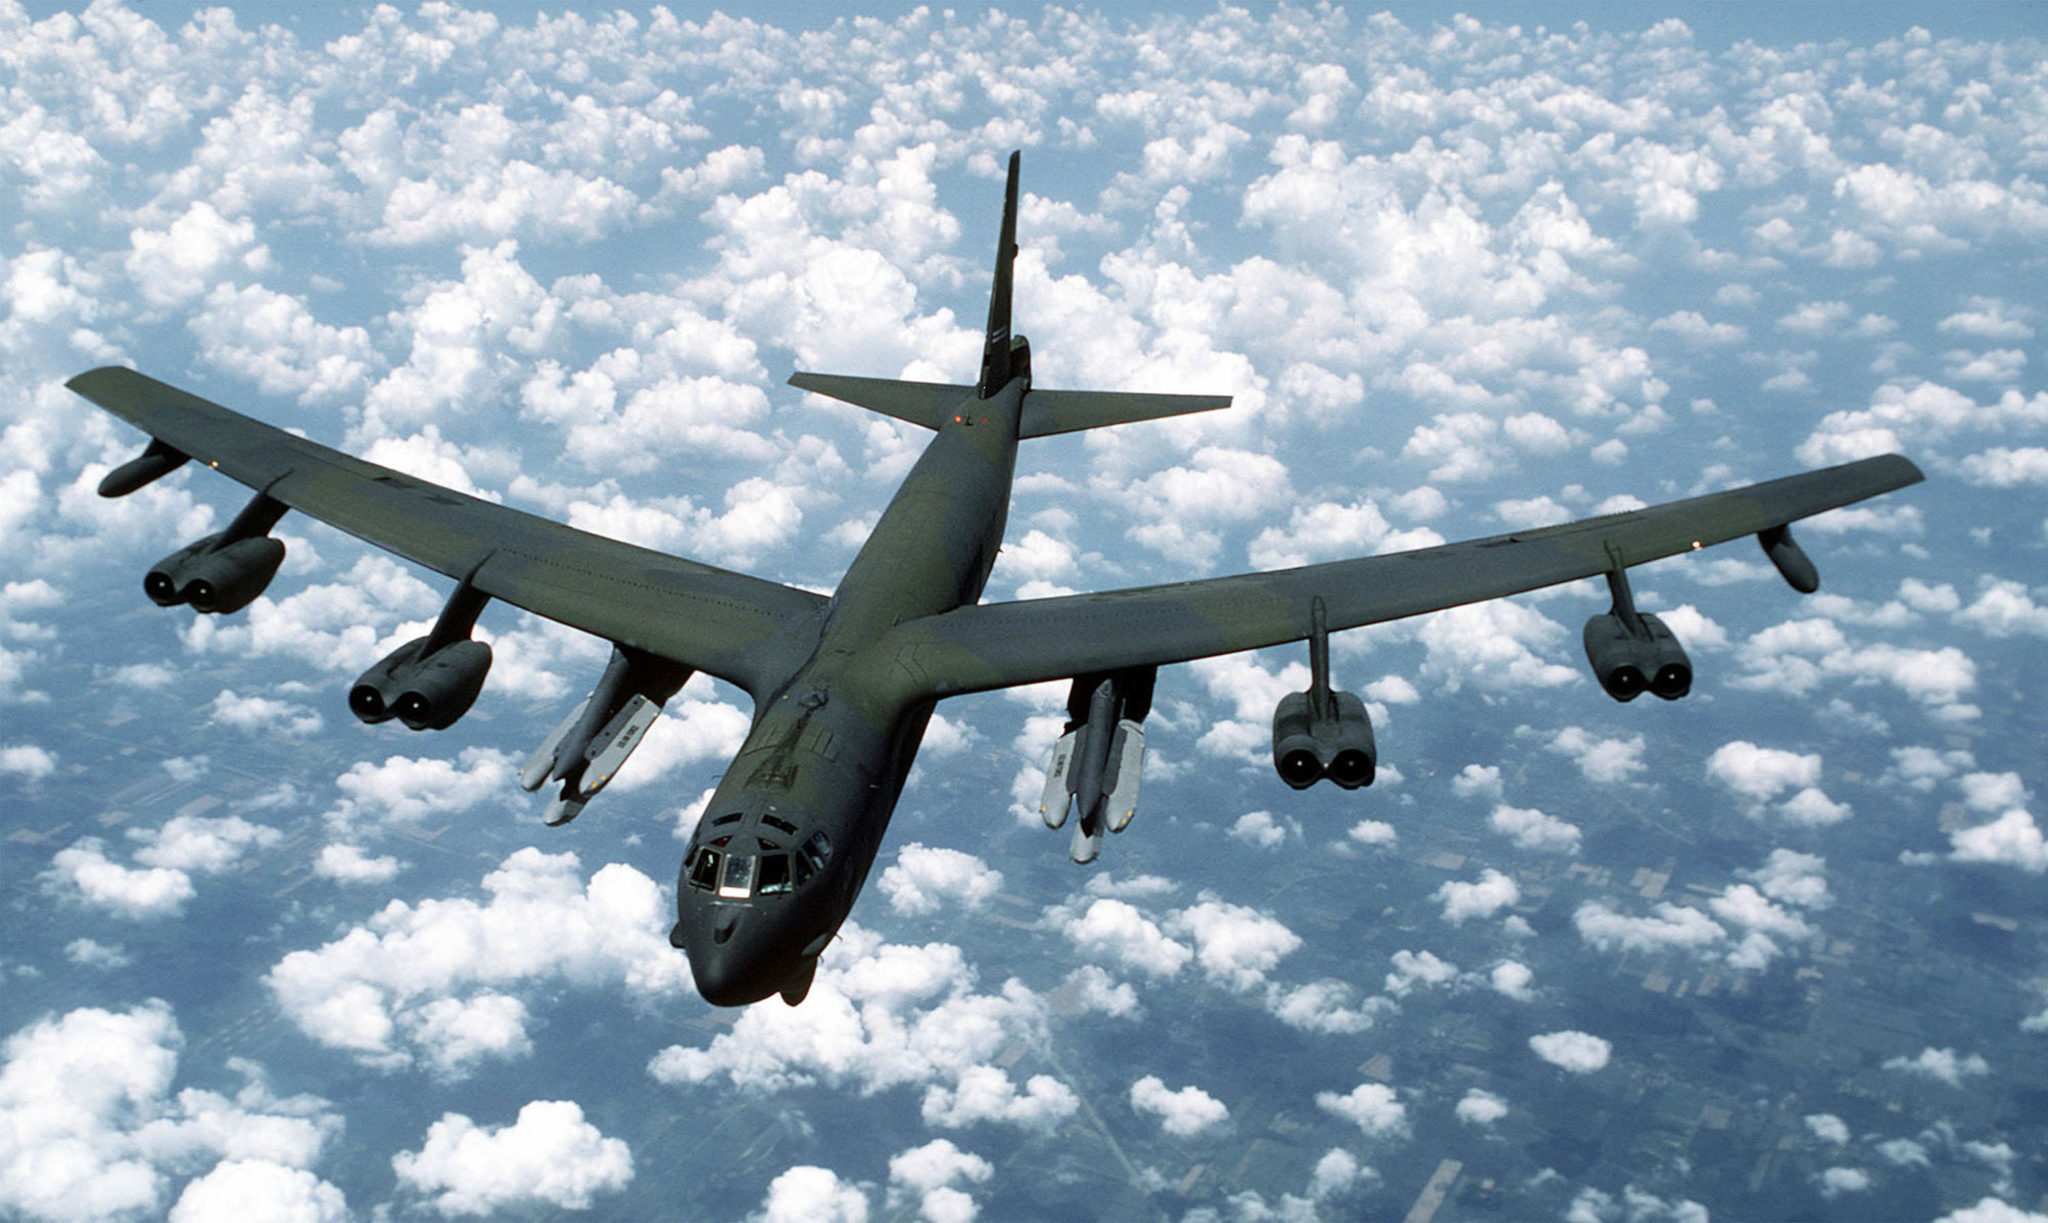 394982 02: An air-to-air front view of a B-52G Stratofortress aircraft from the 416th Bombardment Wing armed with Air-Launched Cruise Missiles in an undated photo. (Photo by U.S. Air Force/Getty Images)